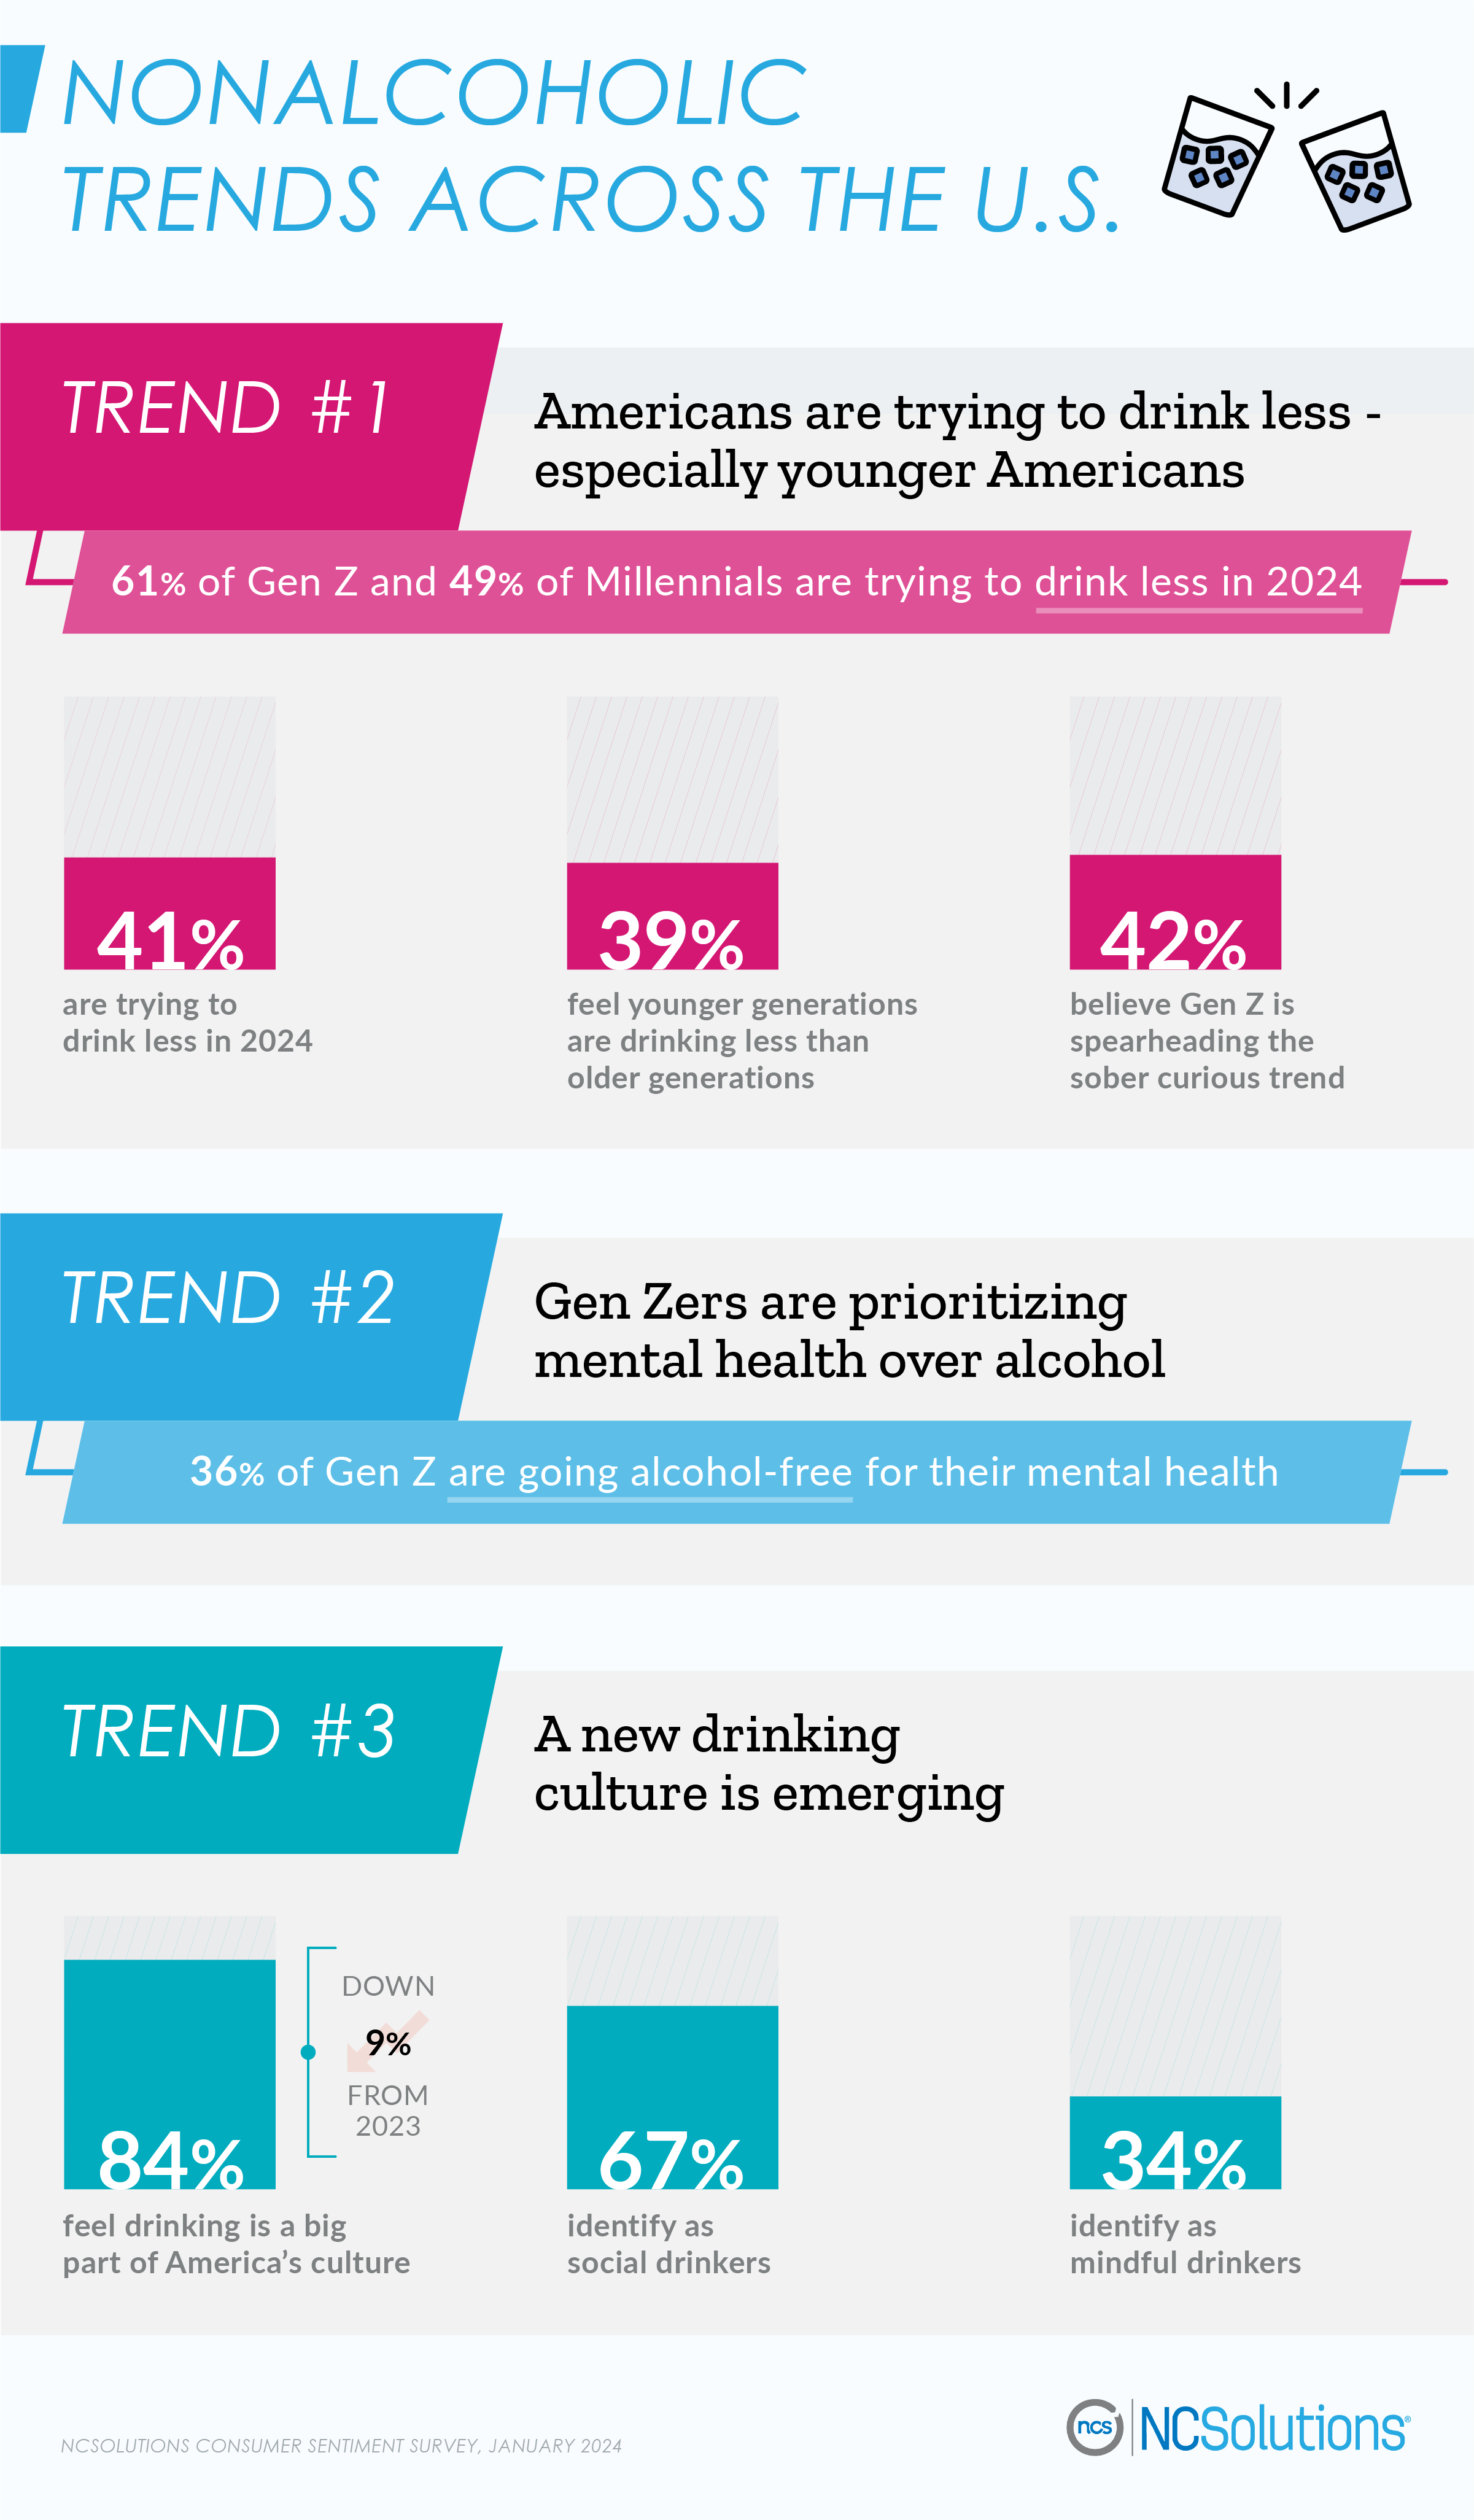 Nonalcoholic trends in 2024 - report by ncsolutions.com 